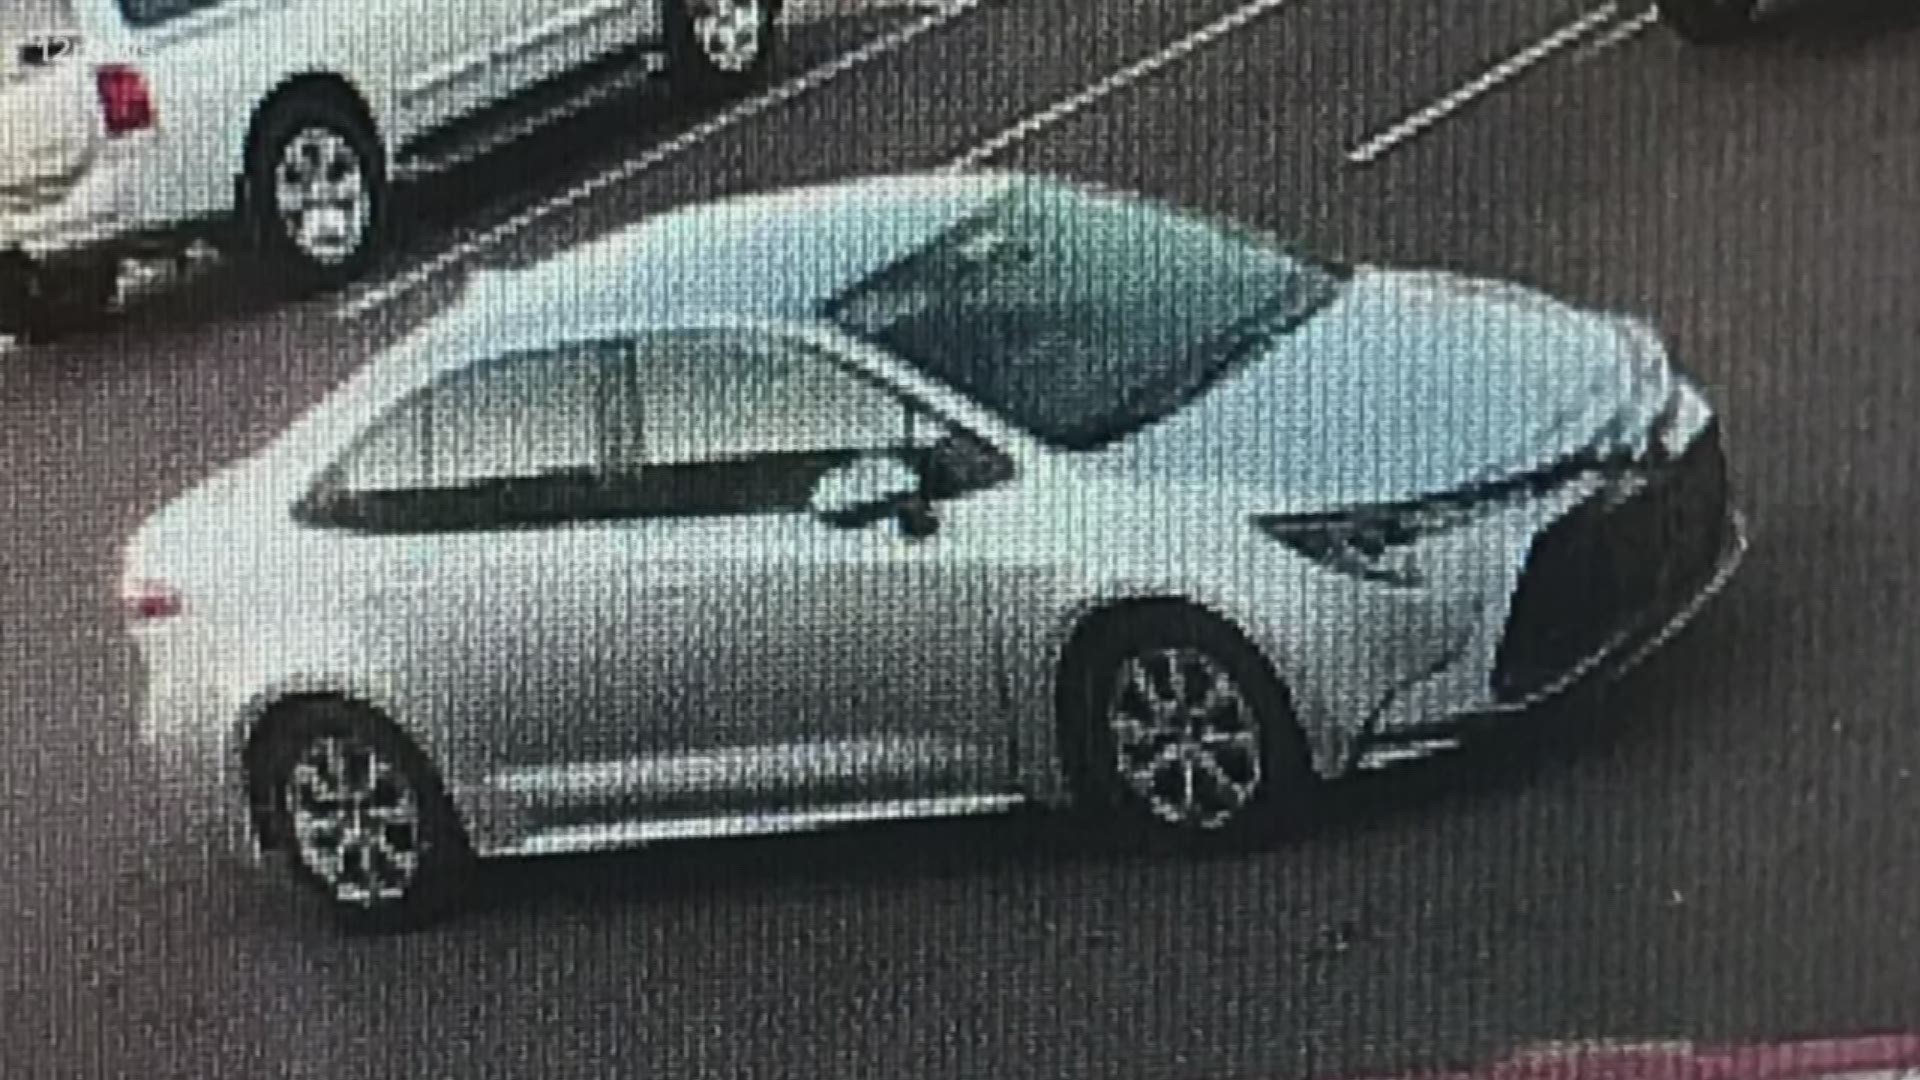 Two suspects are believed to have robbed the Daisy Mail post office in Anthem and a postal worker in Avondale. The get away car is a silver Toyota Corolla.